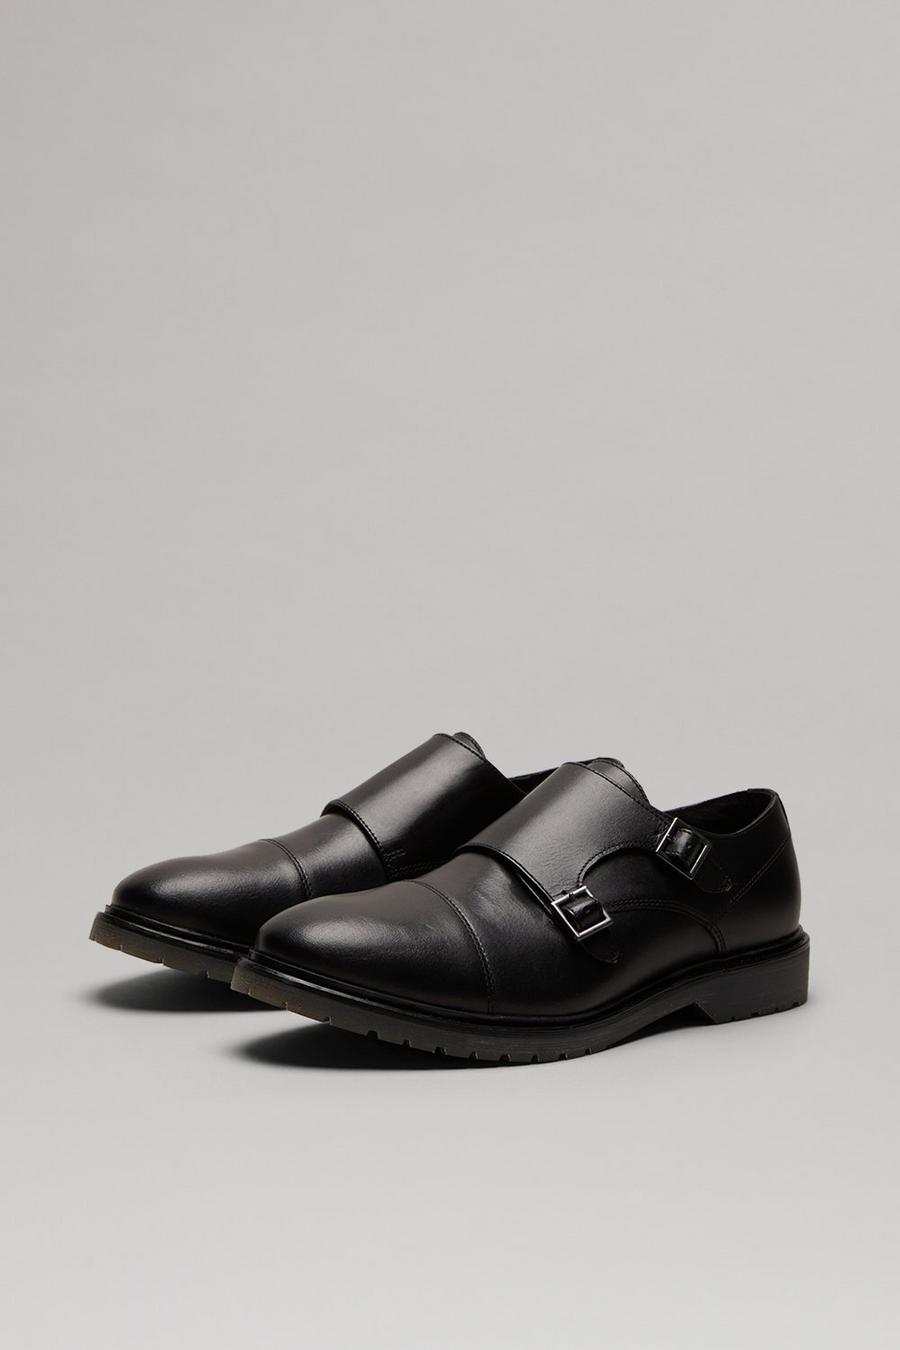 Black Monk Strap Shoes With Chunky Sole